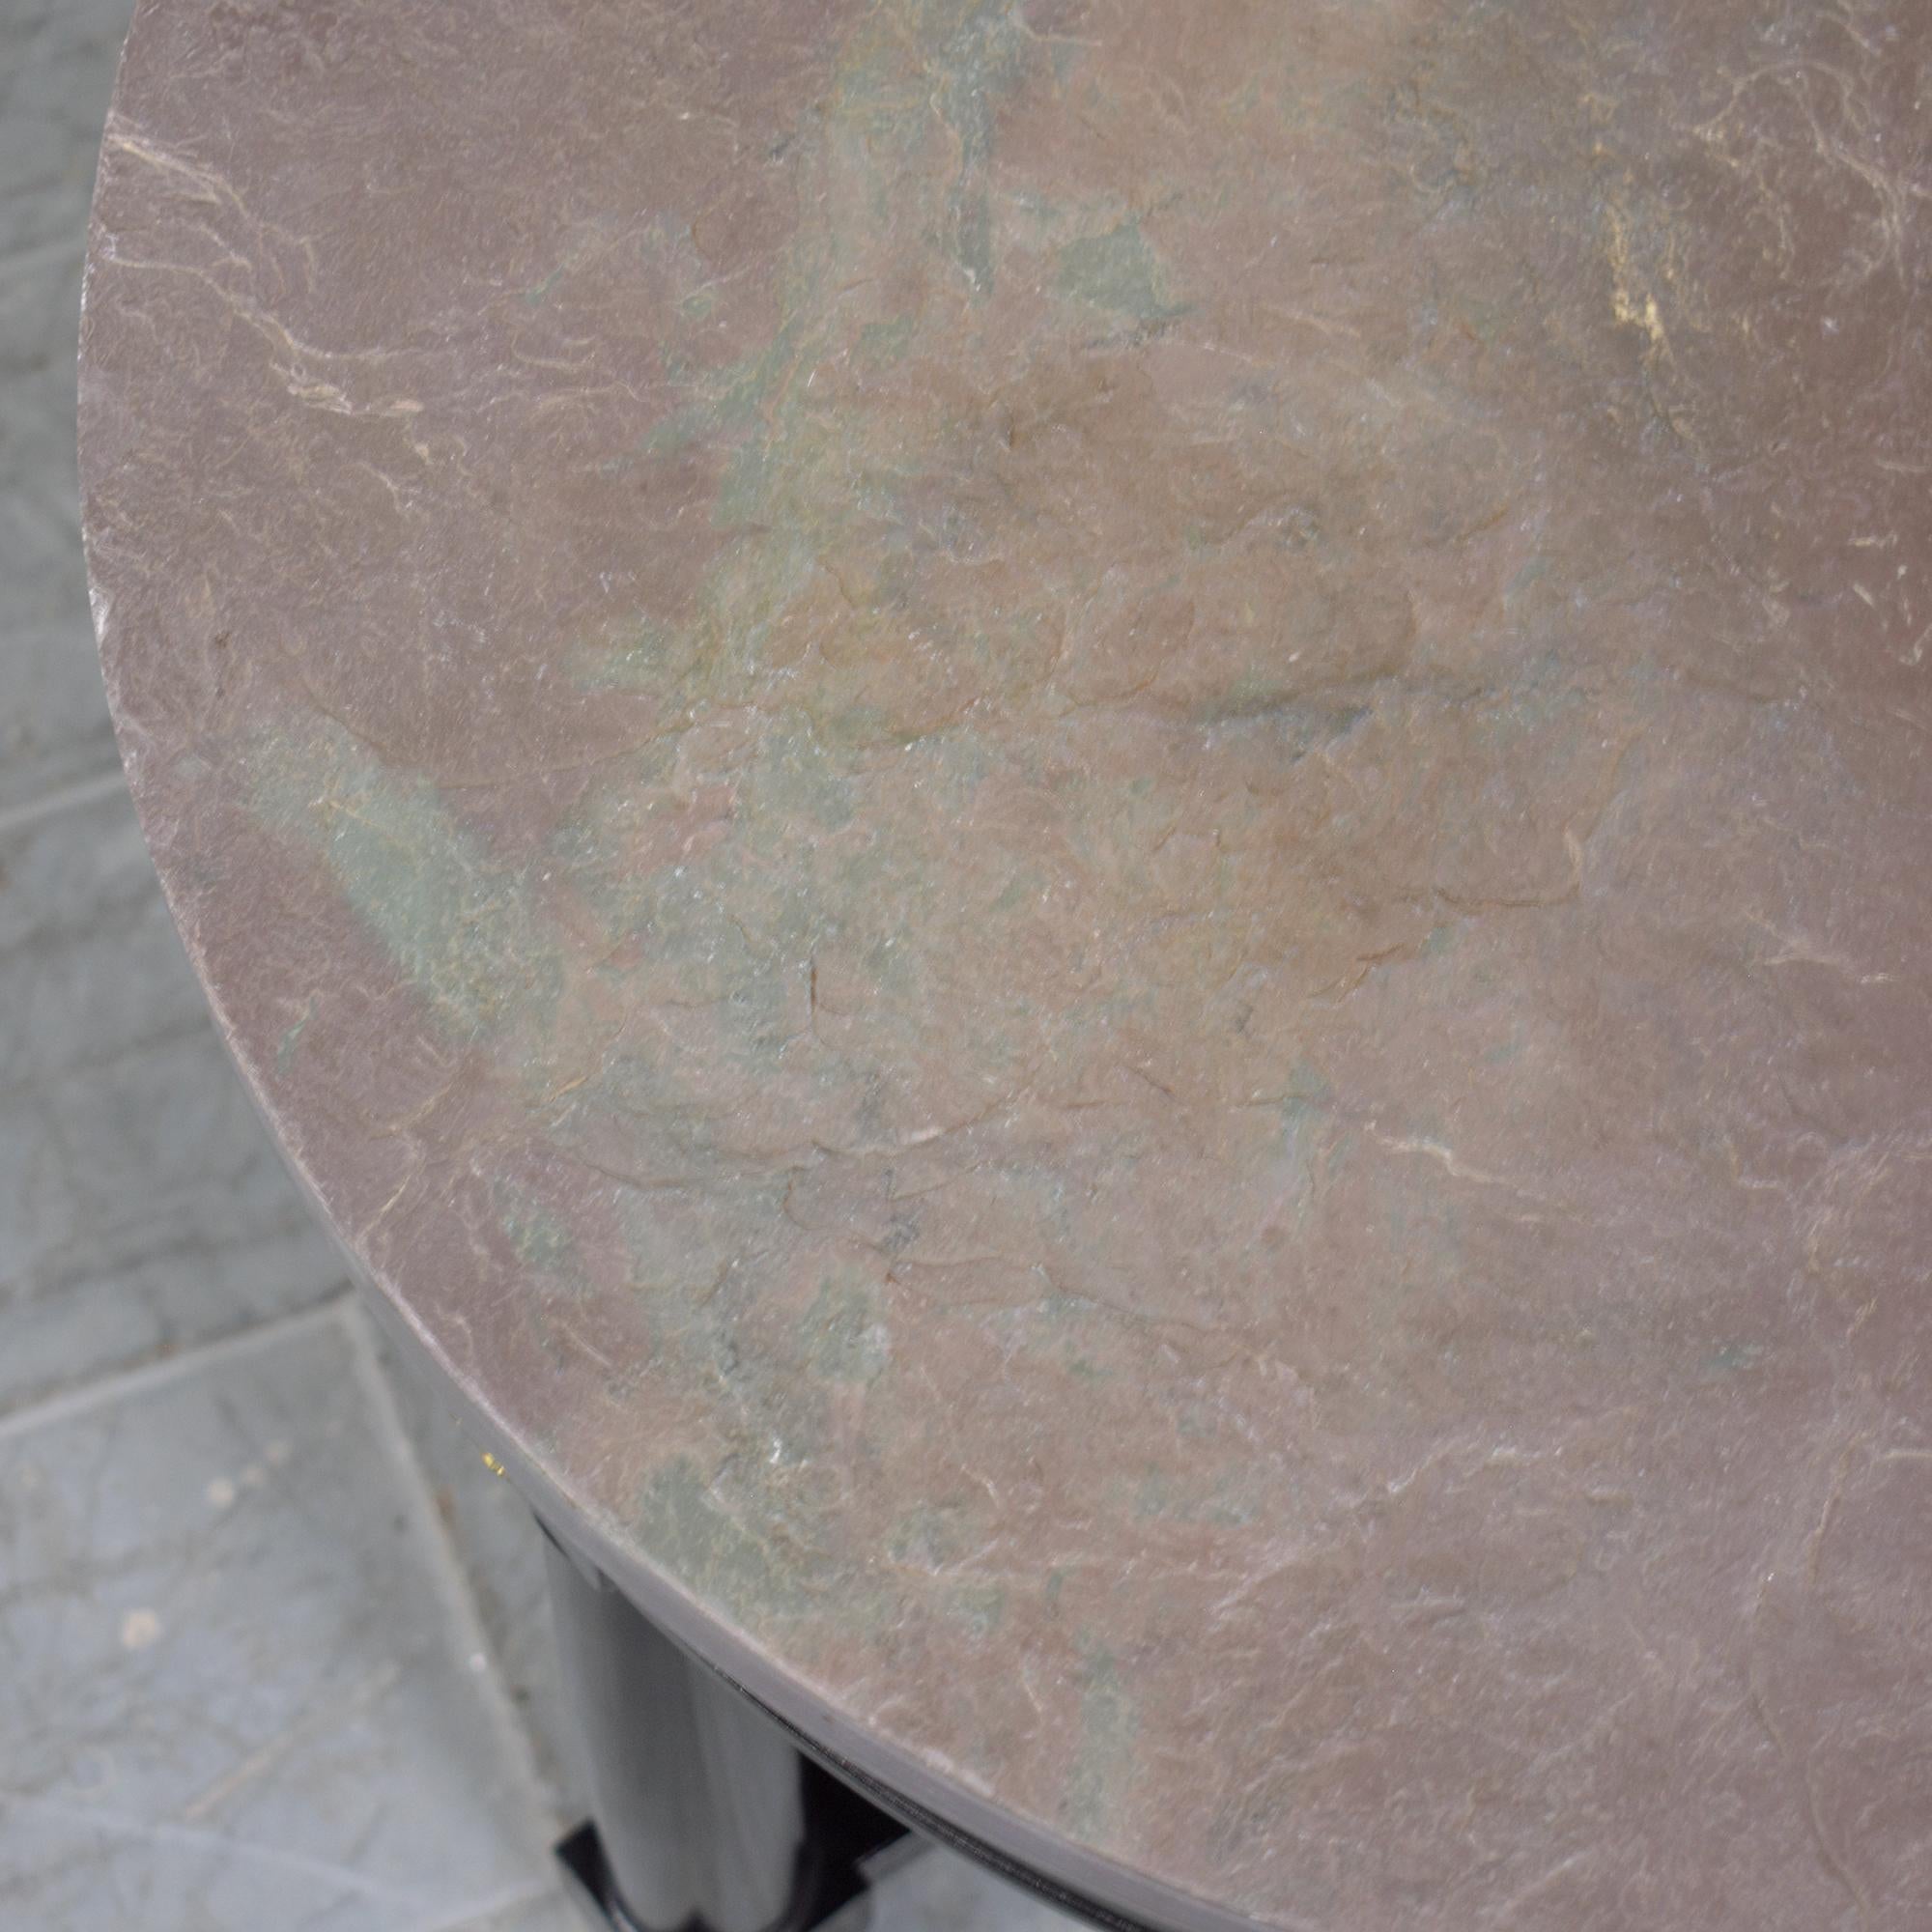 Mahogany Restored Vintage Regency-Style Round Side Table with Grey Marble Top For Sale